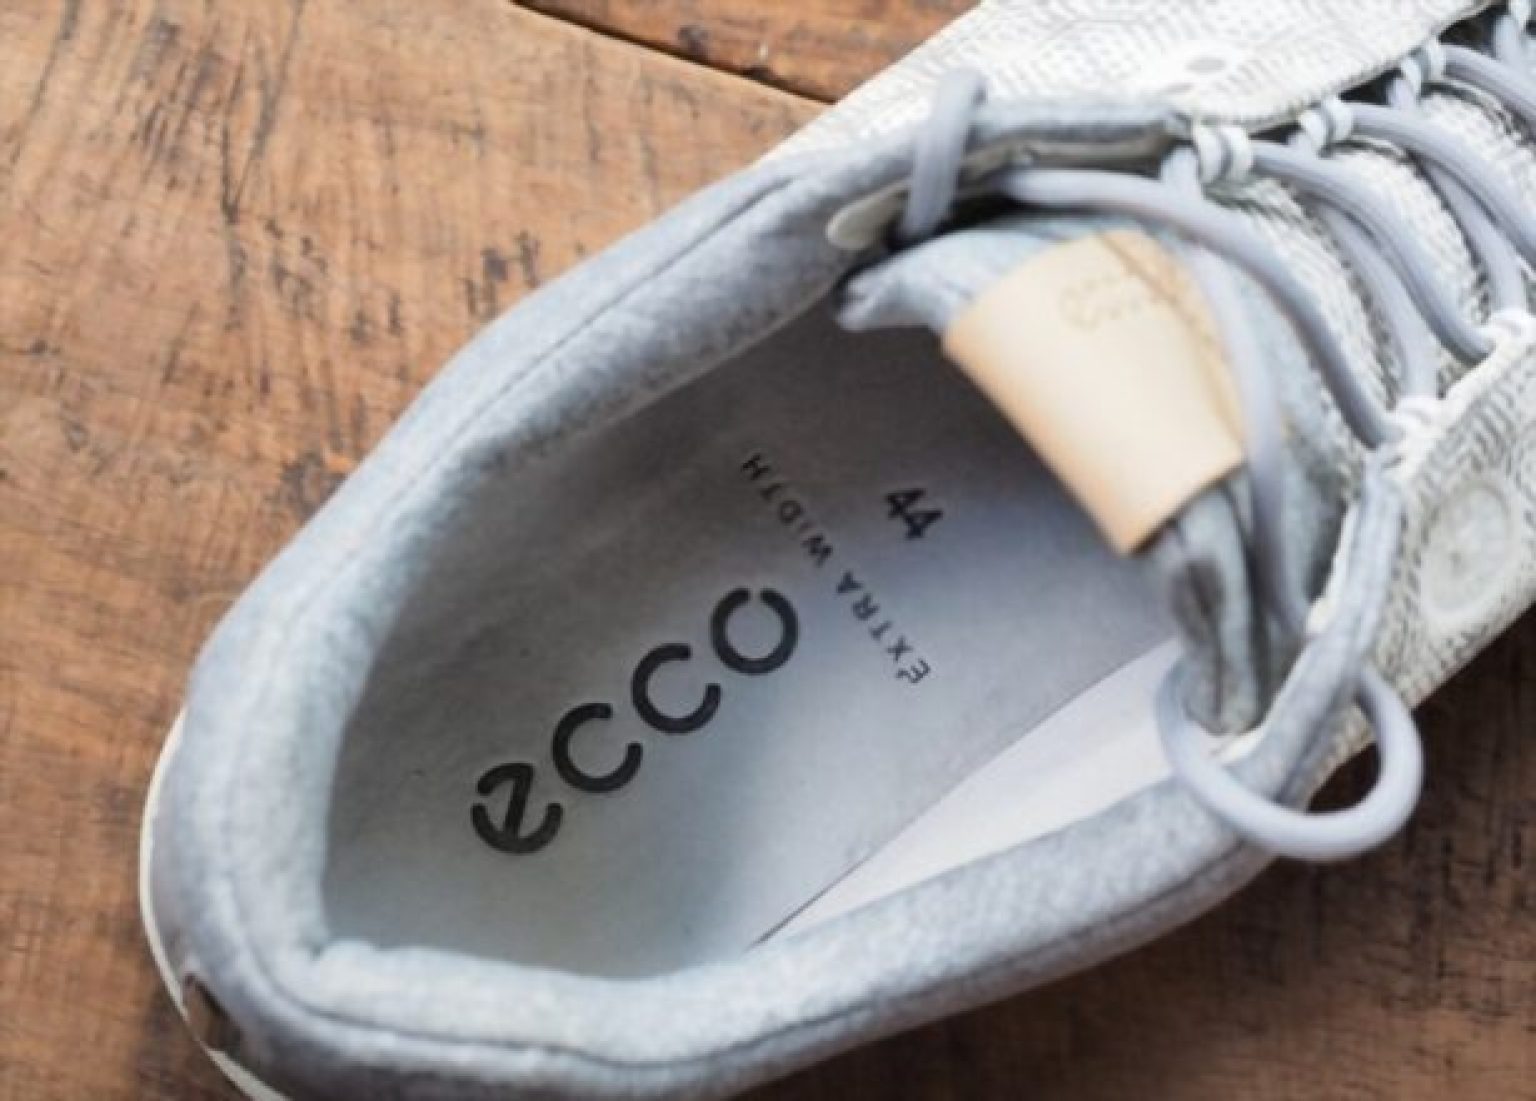 ecco-shoe-size-chart-find-your-ecco-shoe-sizing-the-shoe-box-nyc